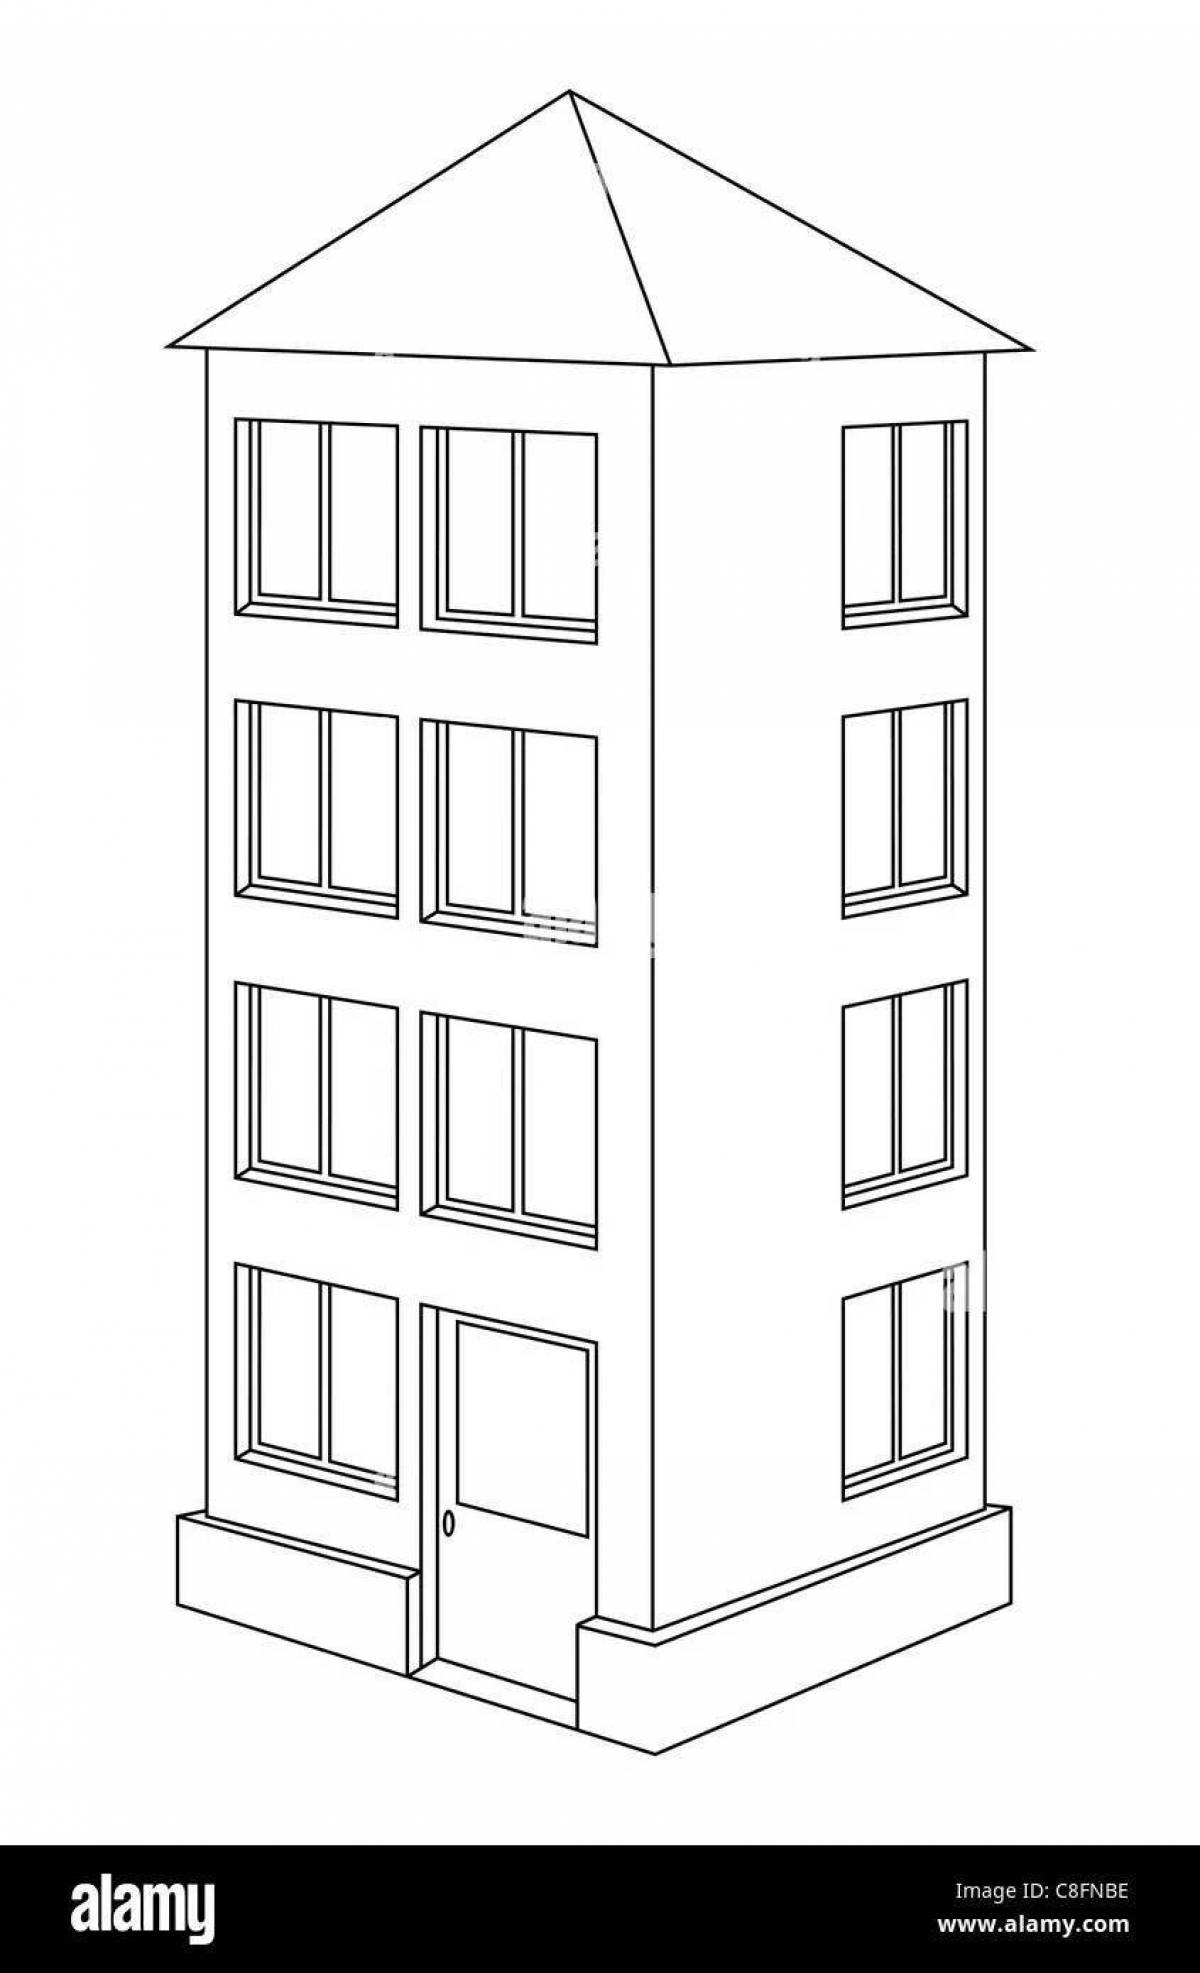 Coloring page of an elegant three-storey house